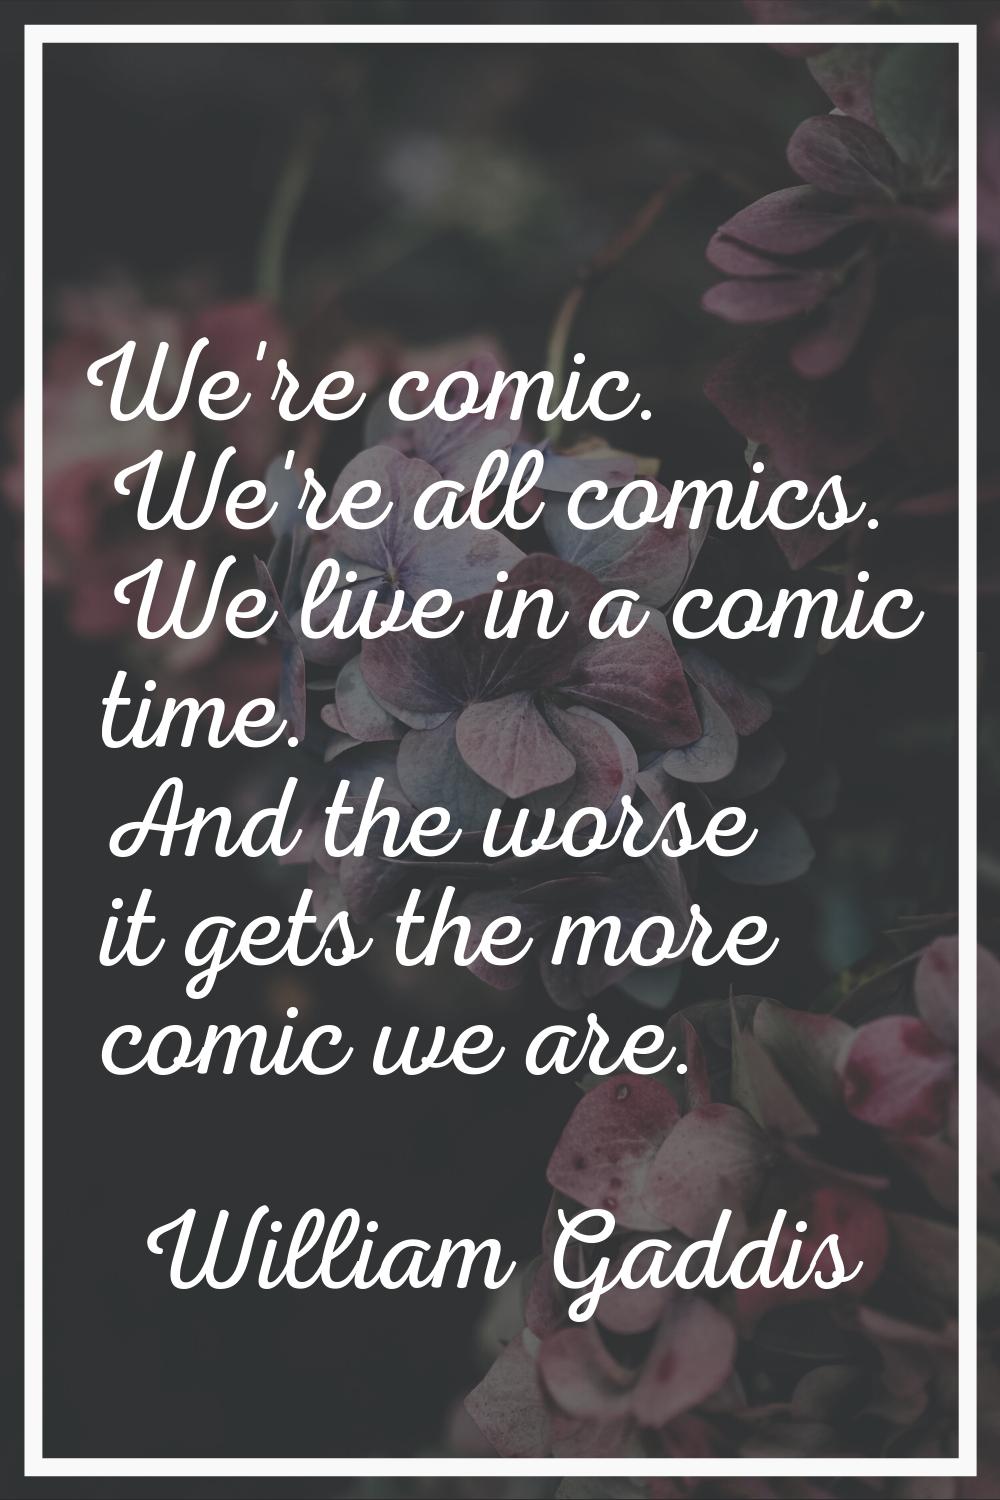 We're comic. We're all comics. We live in a comic time. And the worse it gets the more comic we are